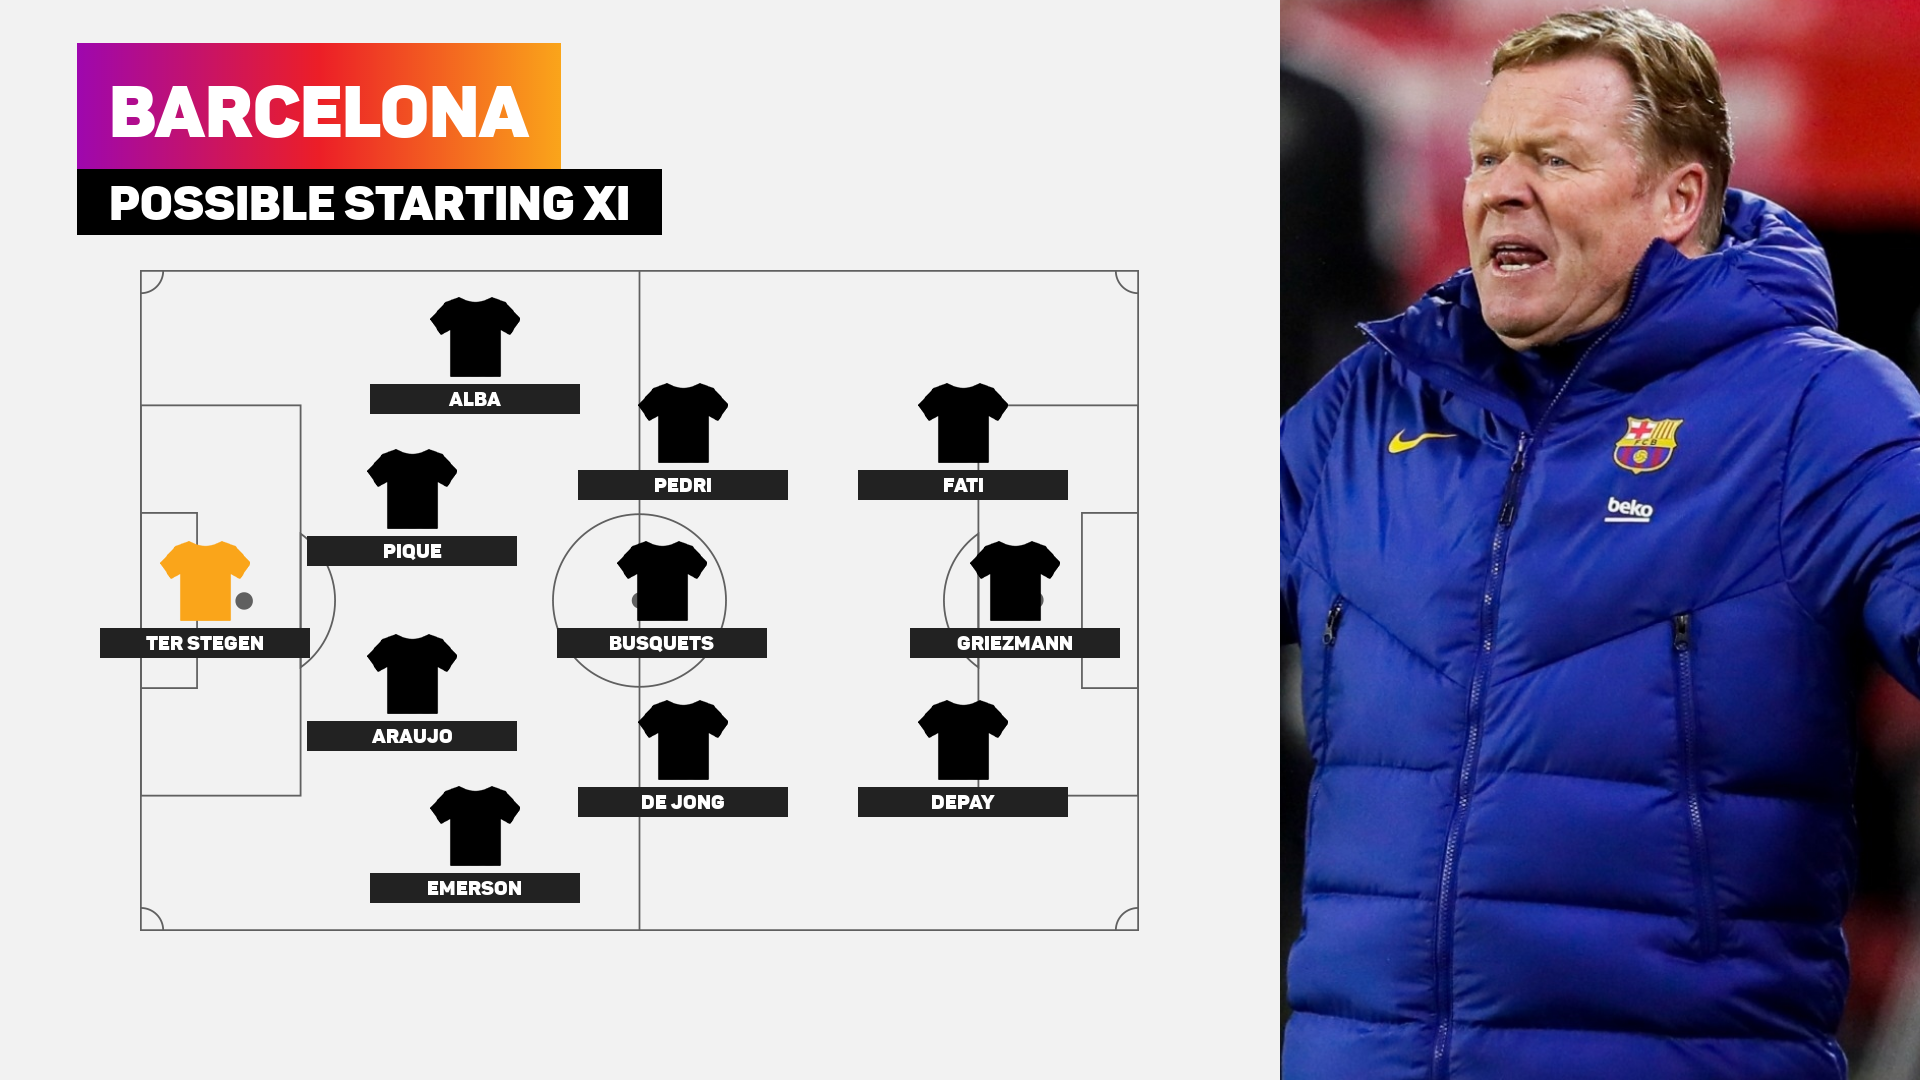 The Barcelona line-up without Lionel Messi this season